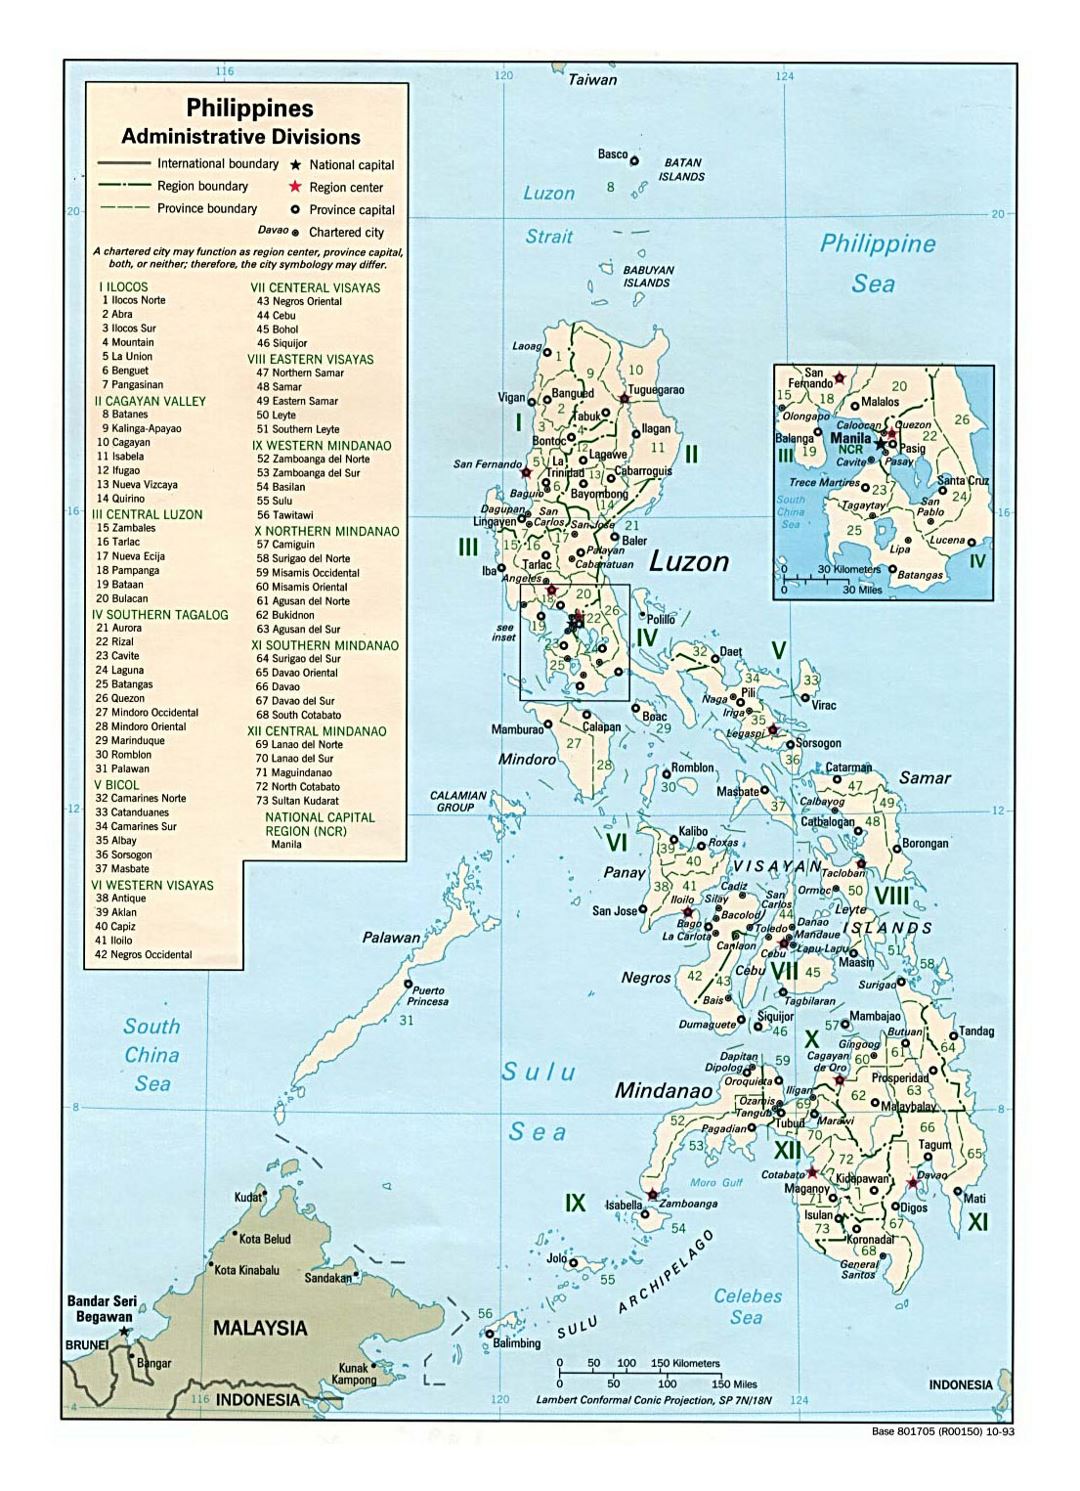 Detailed administrative divisions map of Philippines - 1993